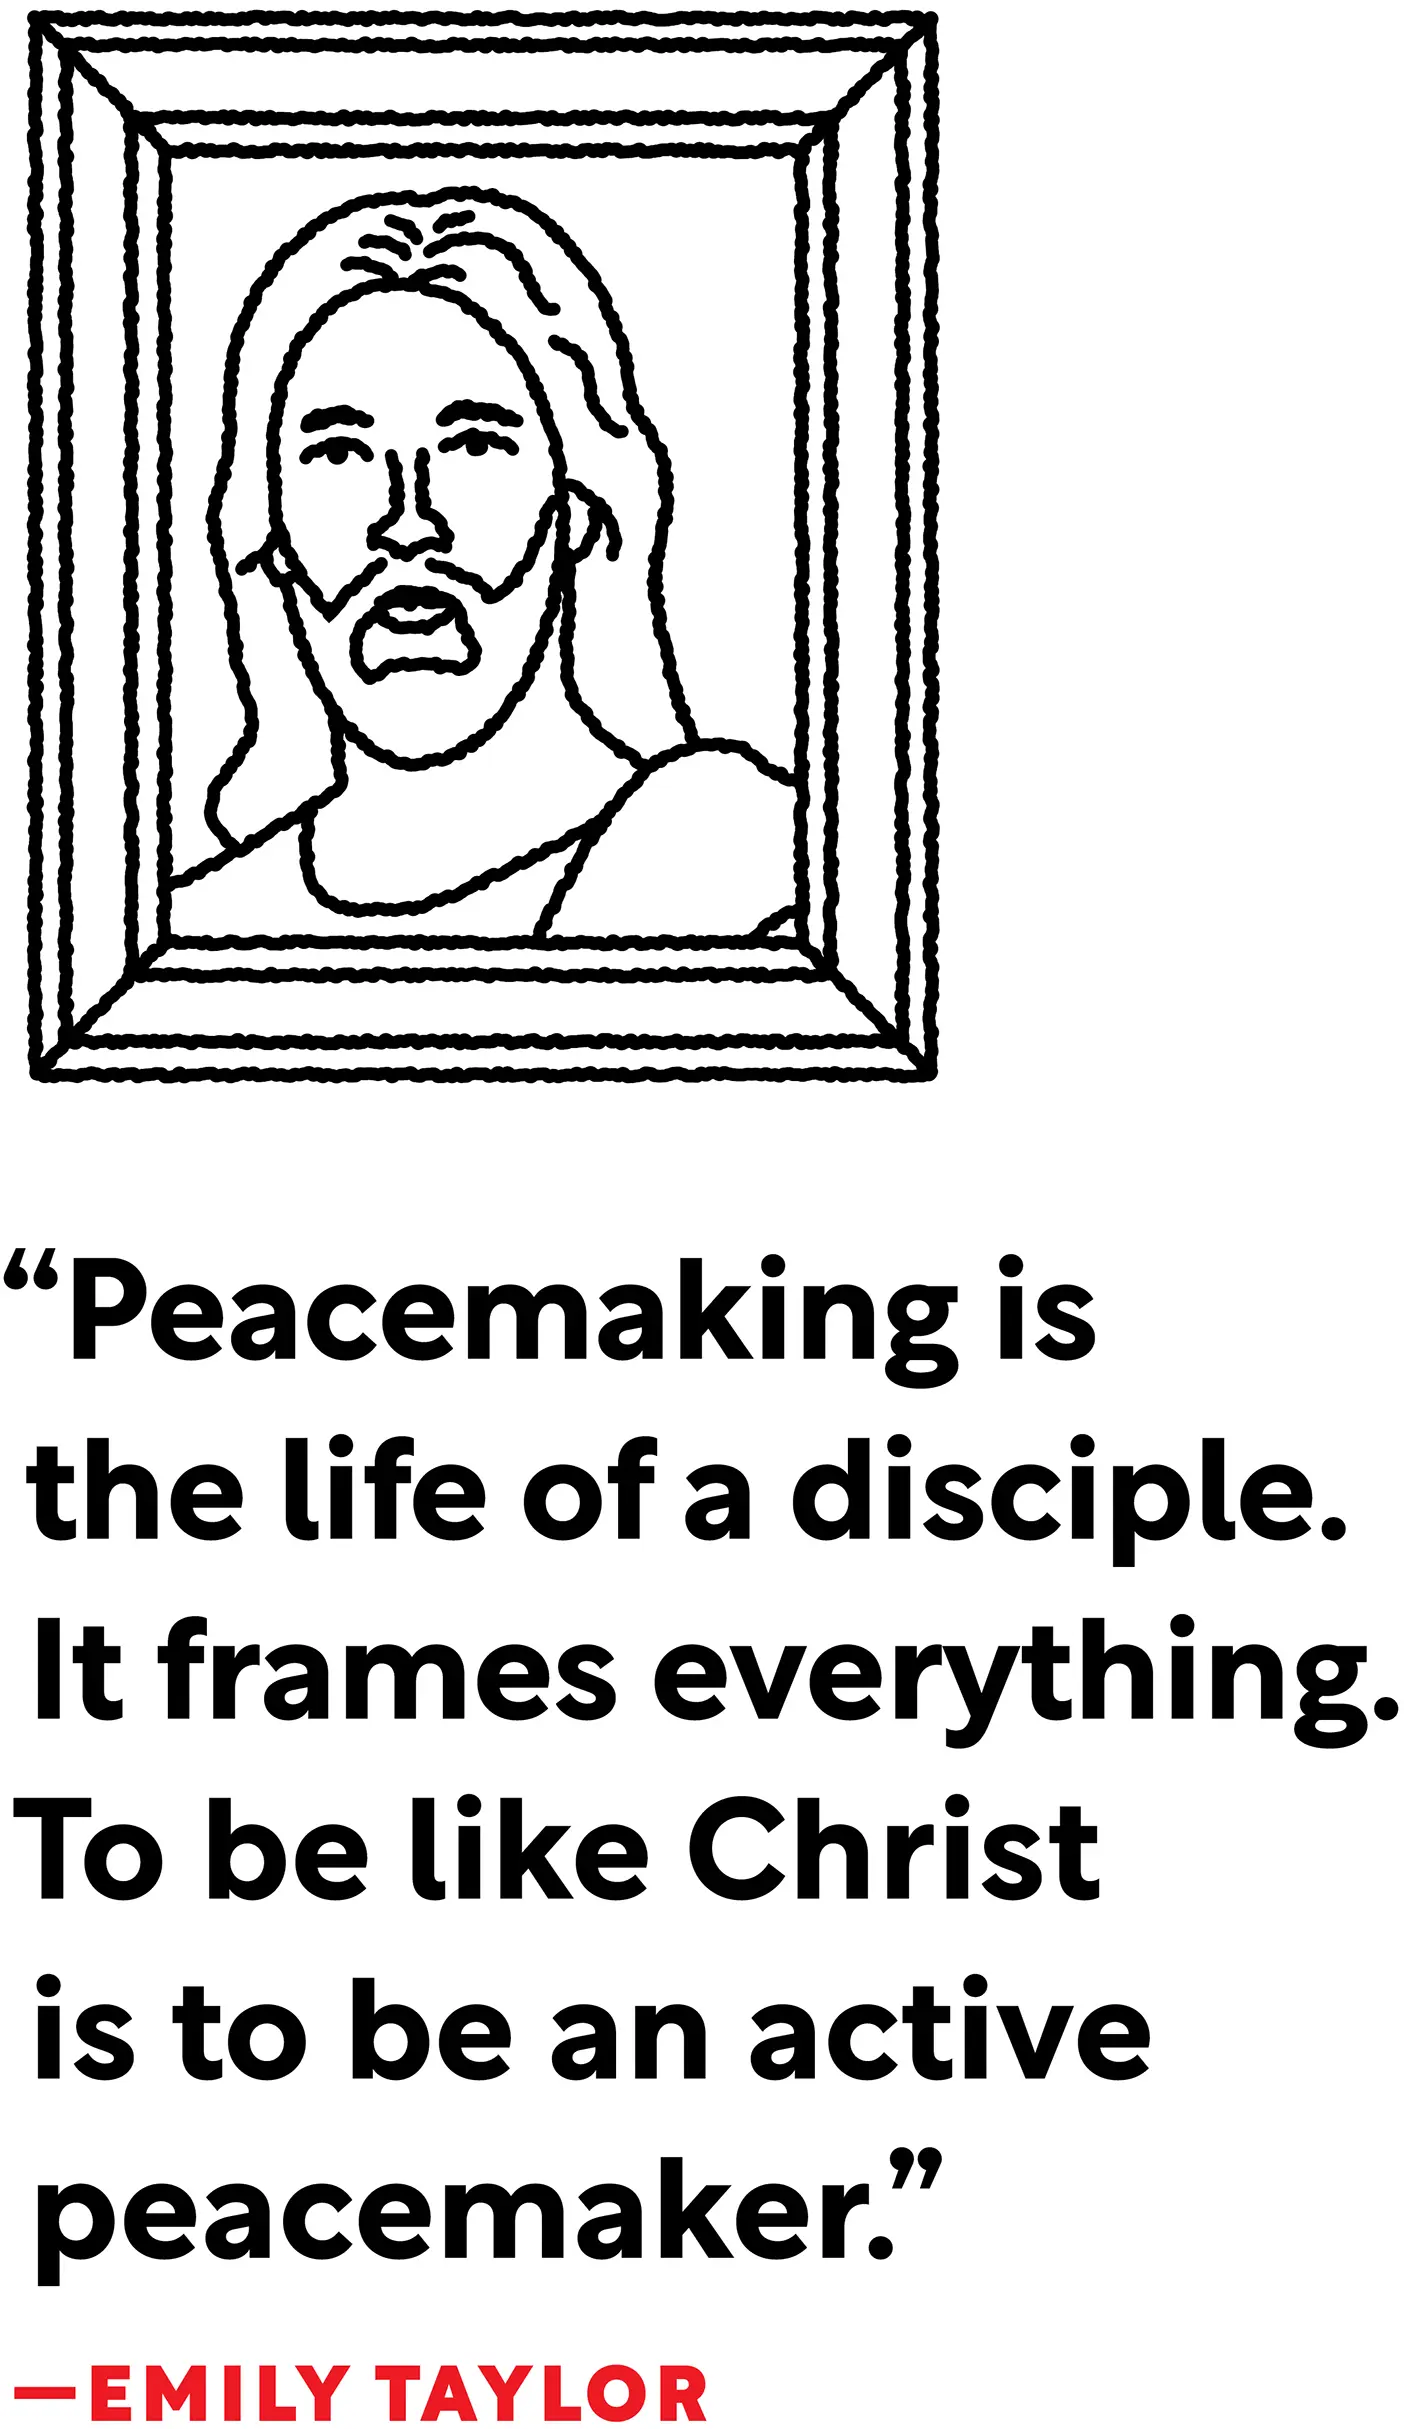 The words: "Peacemaking is the ife of a disciple. It frames everything. To be like Christ is to be an active peacemaker." —Emily Taylor with a line drawing of a framed image of Jesus Christ.